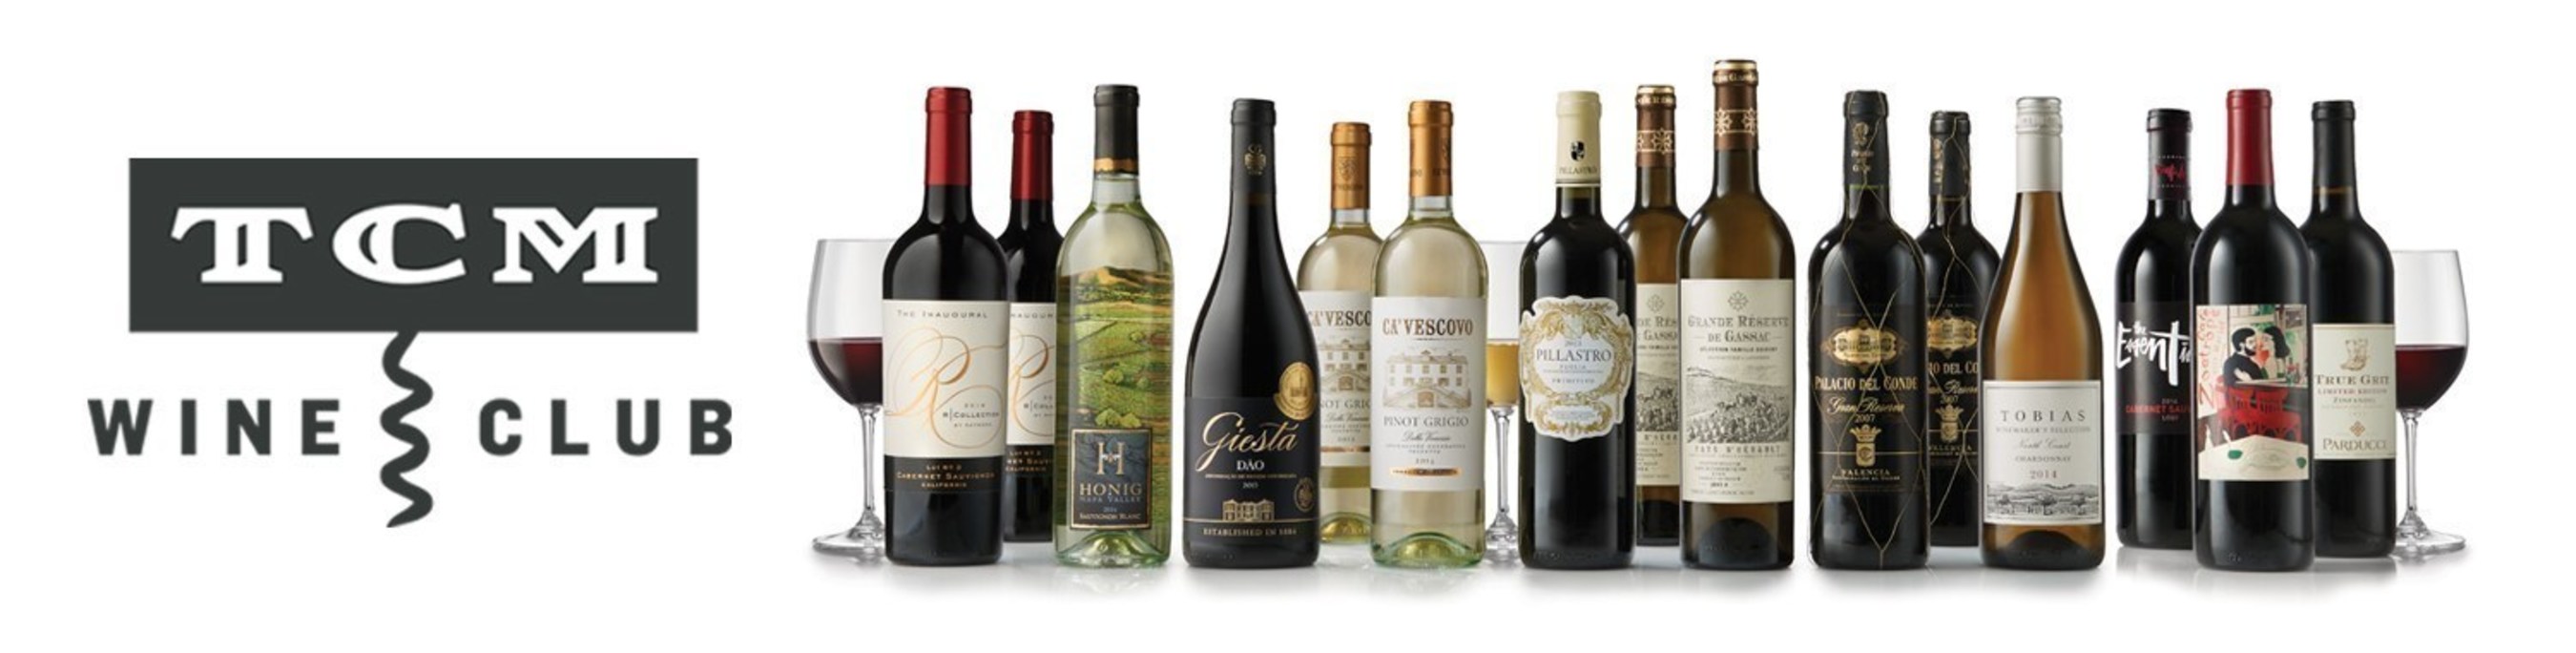 Turner Classic Movies (TCM) Launches TCM Wine Club To Help Consumers Discover Wine Through The Lens Of The Movies